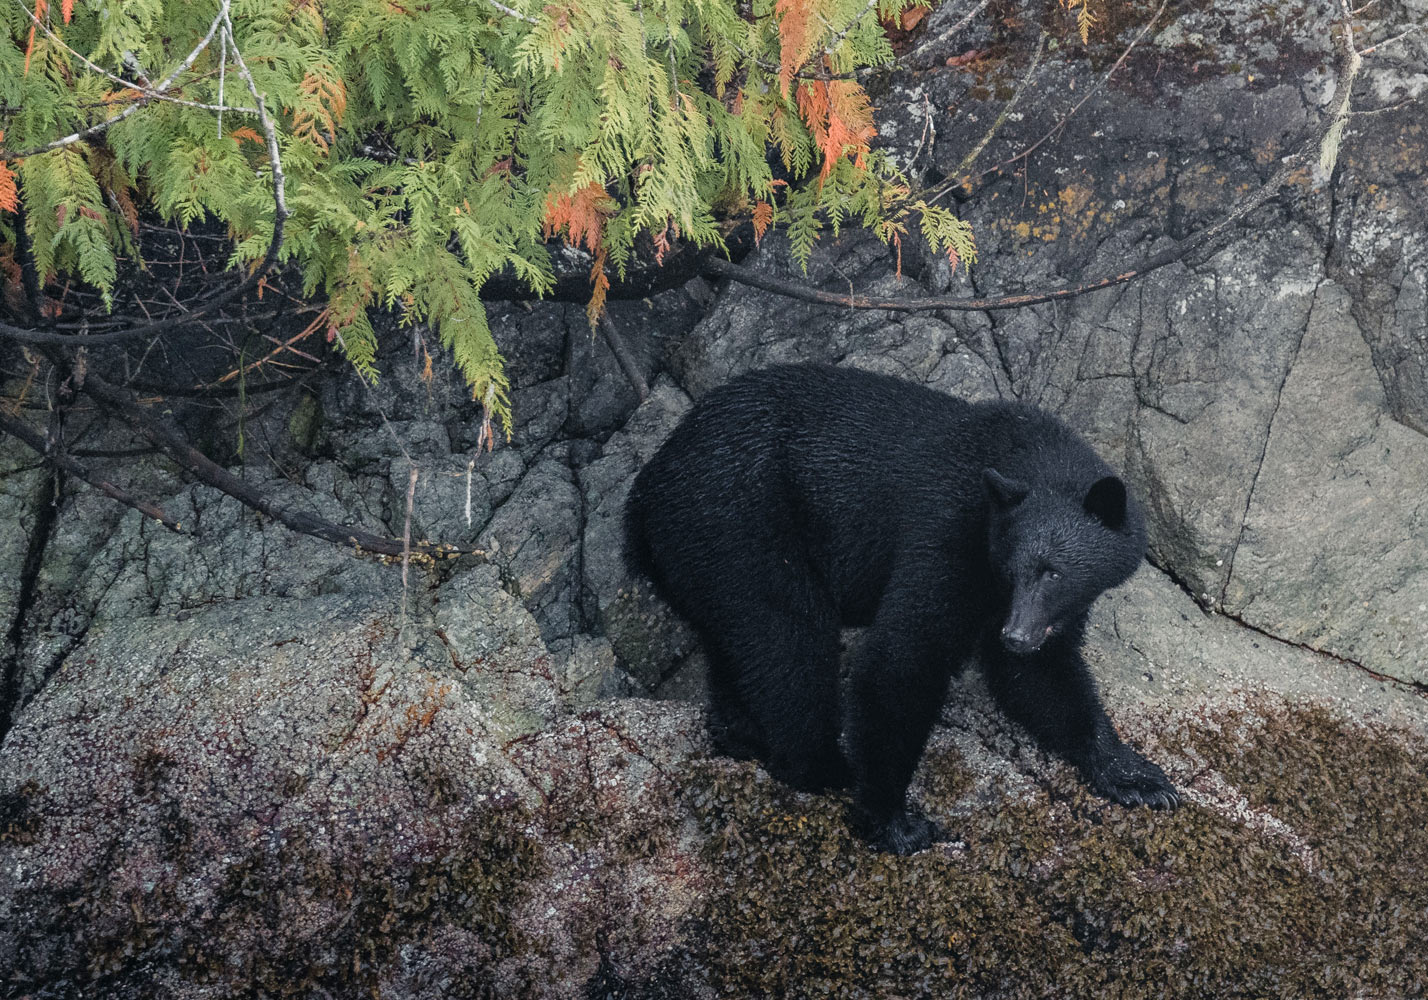 Tofino Bear Watching Tours: What to Expect